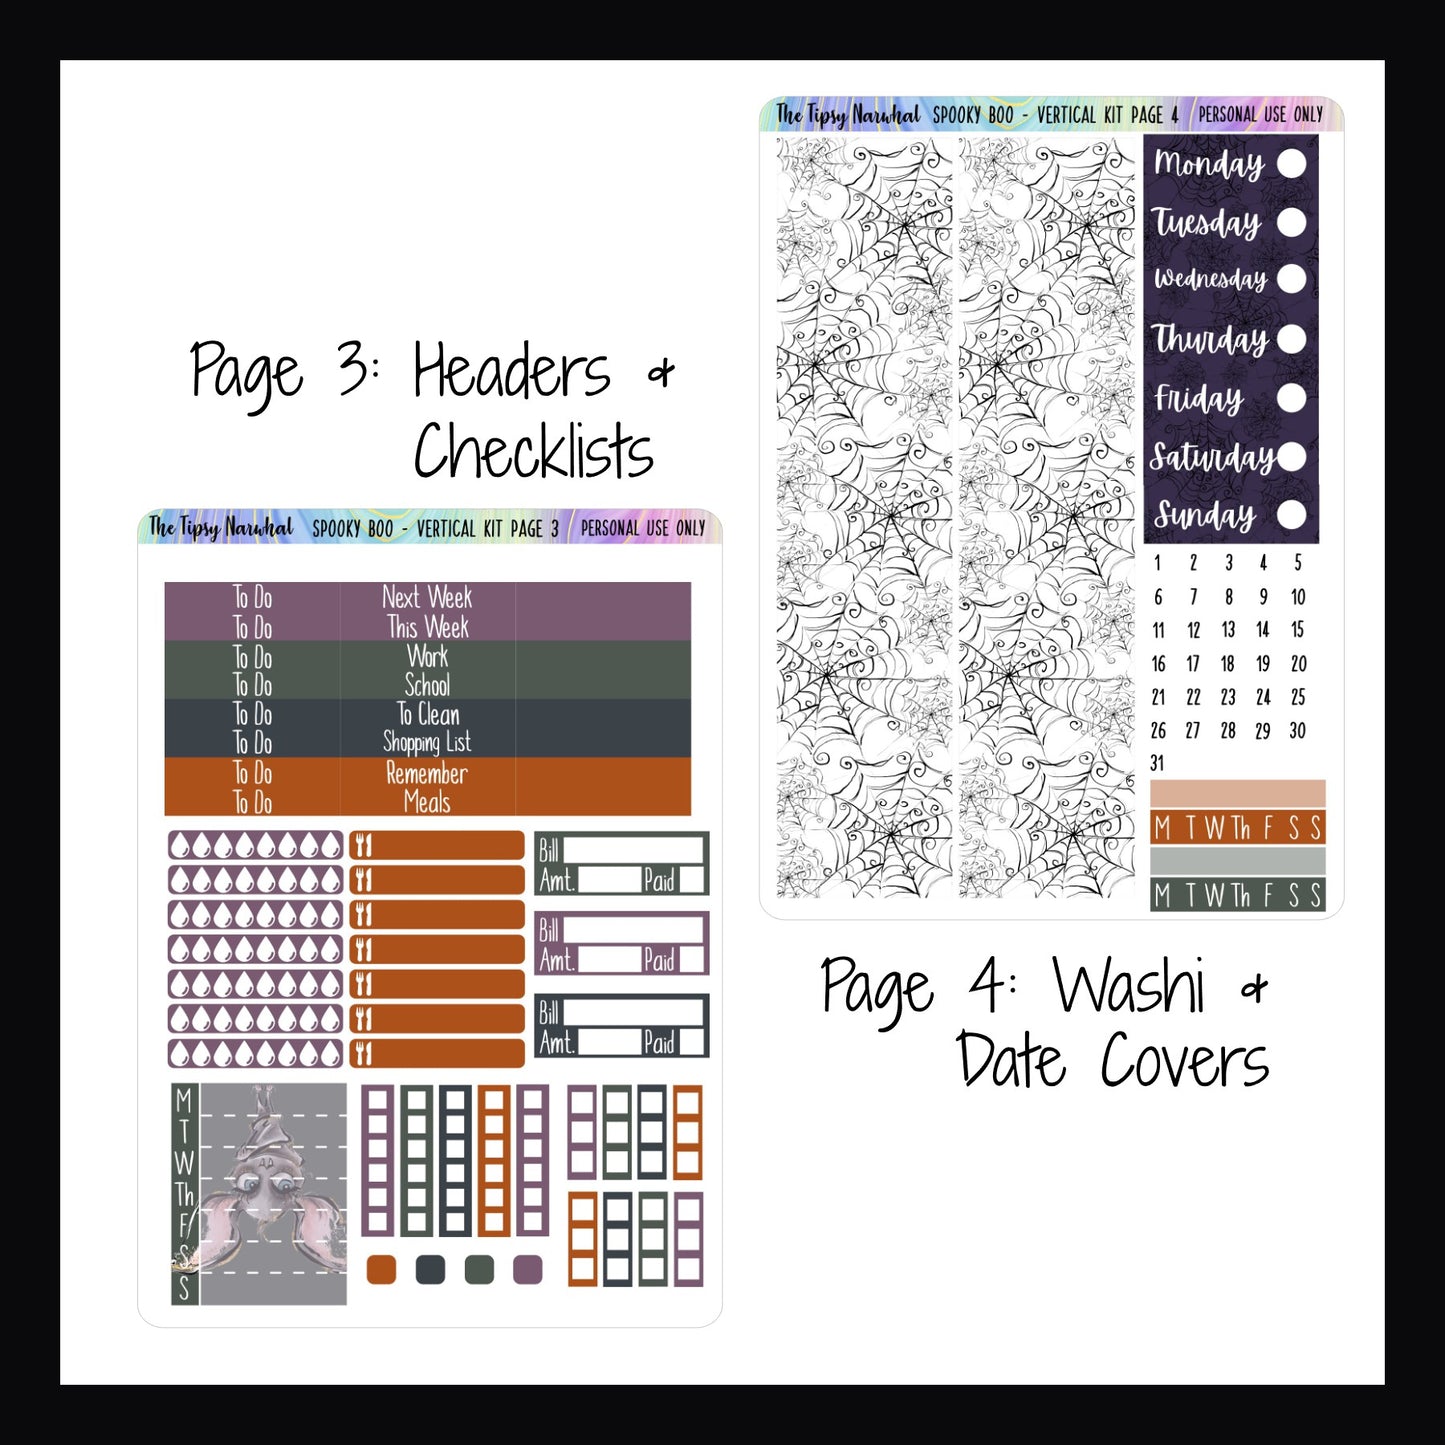 Spooky Boo Vertical Weekly Kit Pages 3 and 4, Washi stickers, date covers, habit trackers, water tracking, meal tracking, weekly sticker, checklist stickers, bill trackers, header stickers, halloween themed, spooky stickers, orange, grey, green, and gray stickers